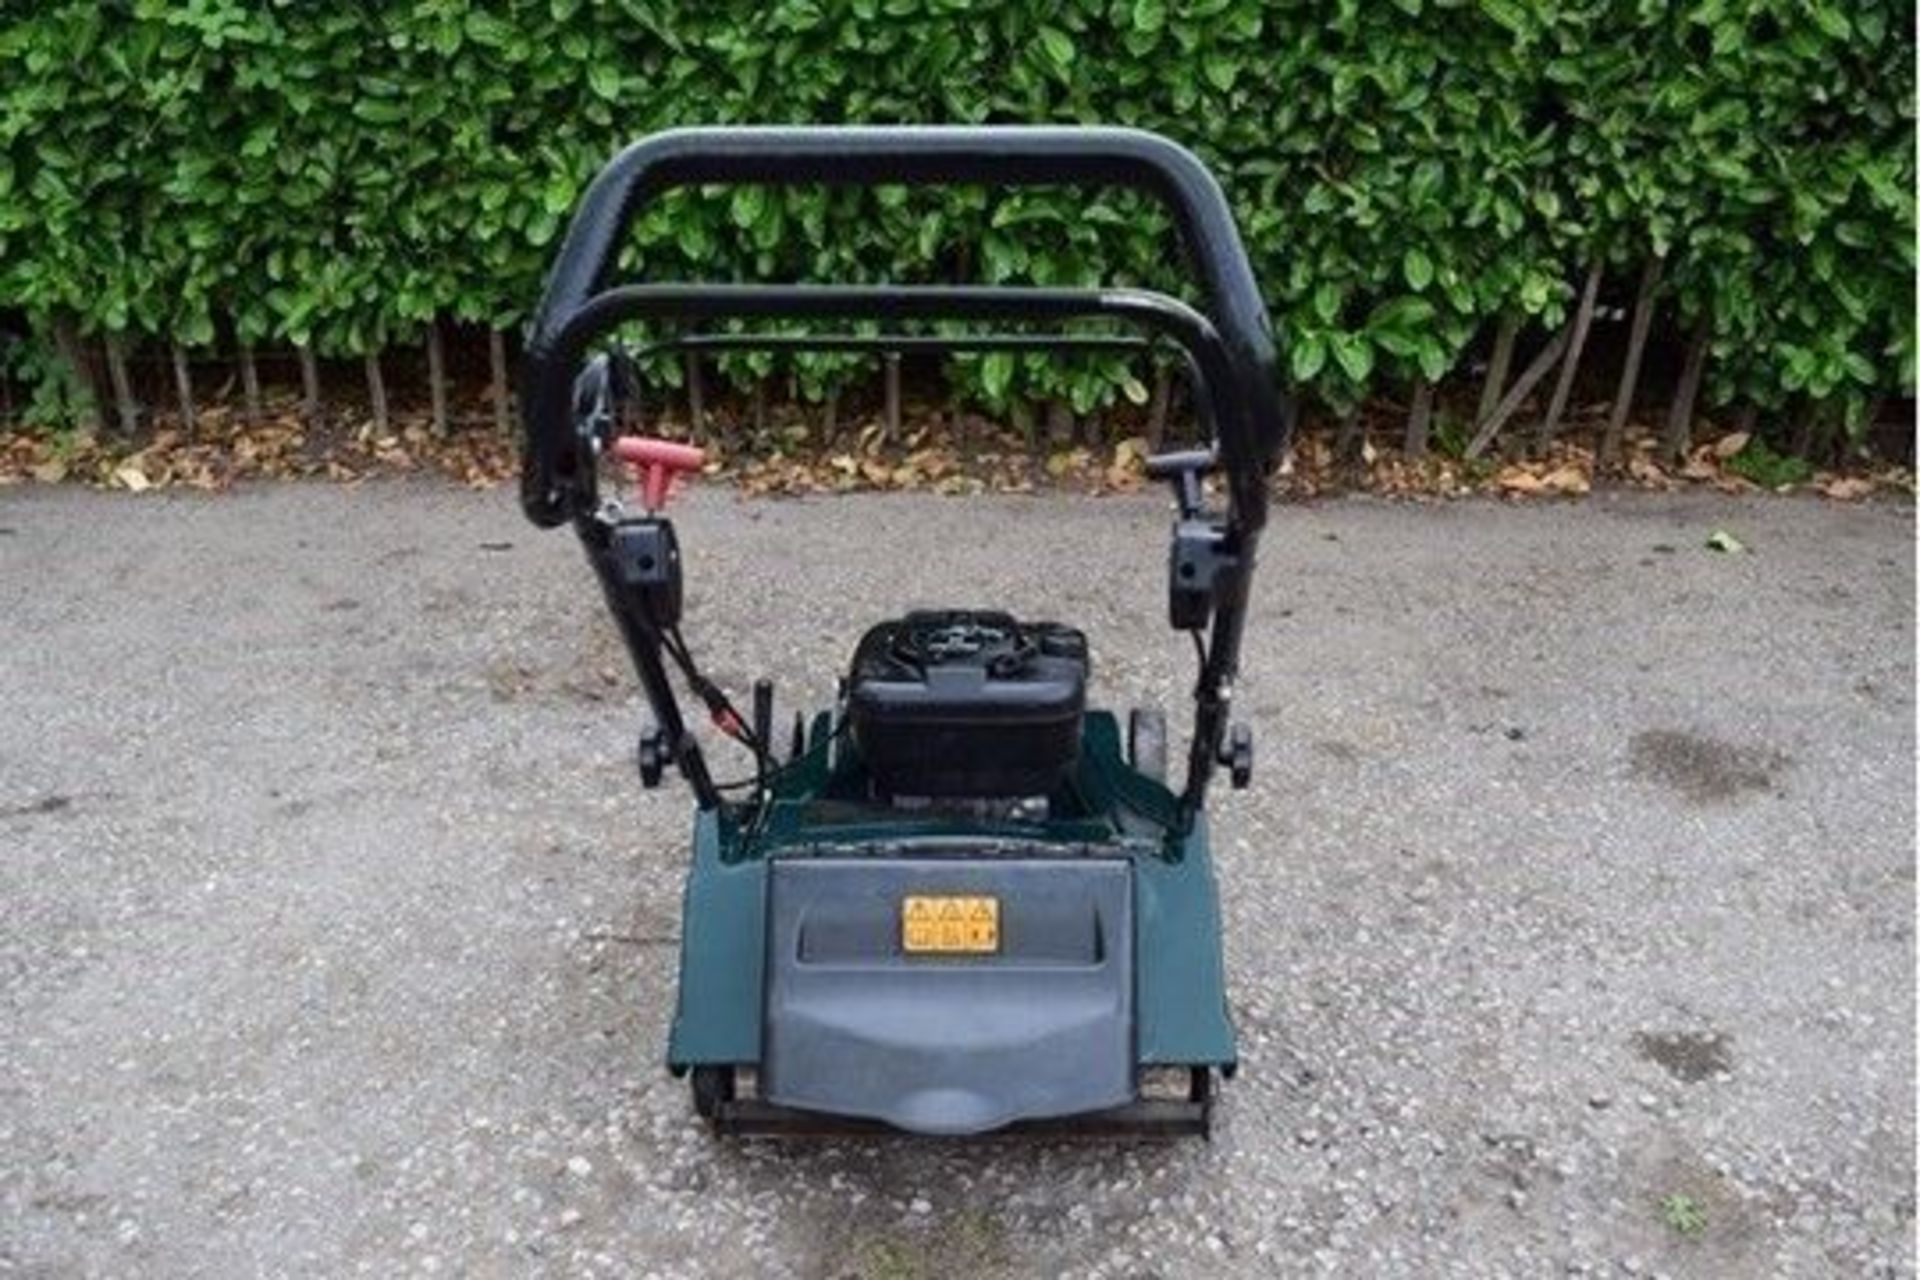 2008 Hayter Harrier 56 Auto Drive Variable Speed 22" Lawn Mower - Image 4 of 6